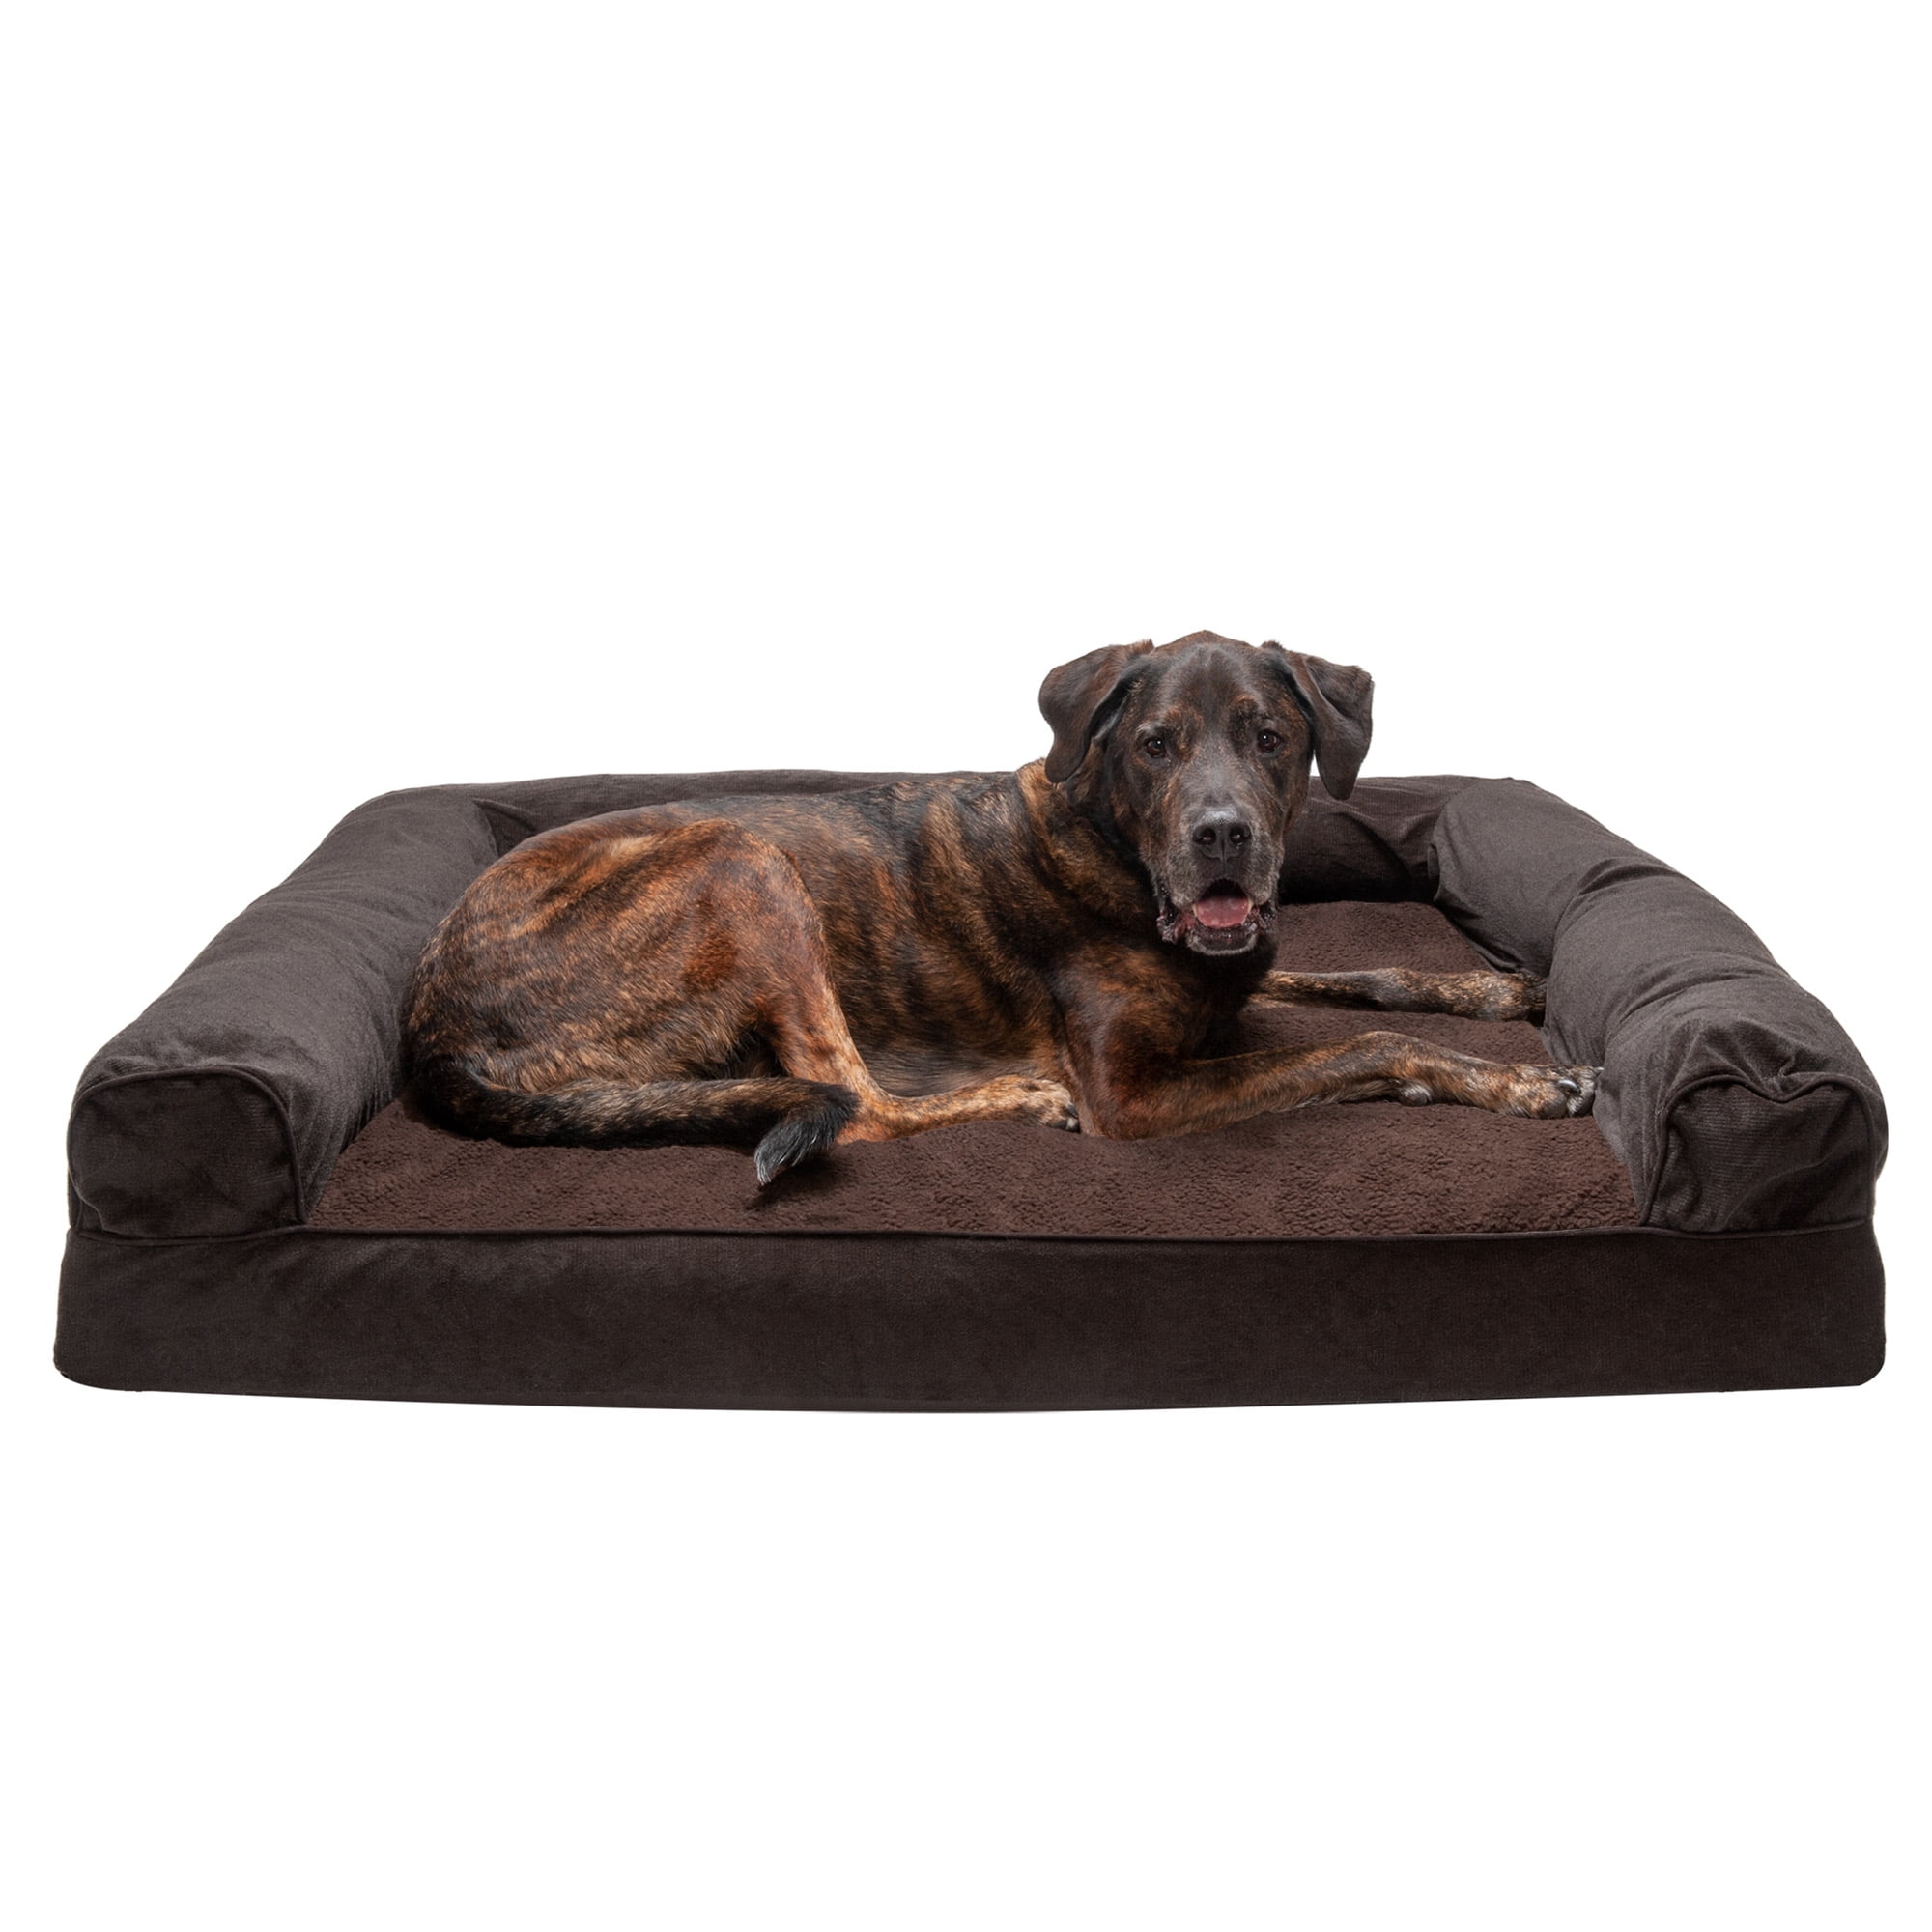 FurHaven Pet Dog Bed | Memory Foam Faux Fleece & Chenille Couch Sofa-Style Pet Bed for Dogs & Cats, Coffee, Plus